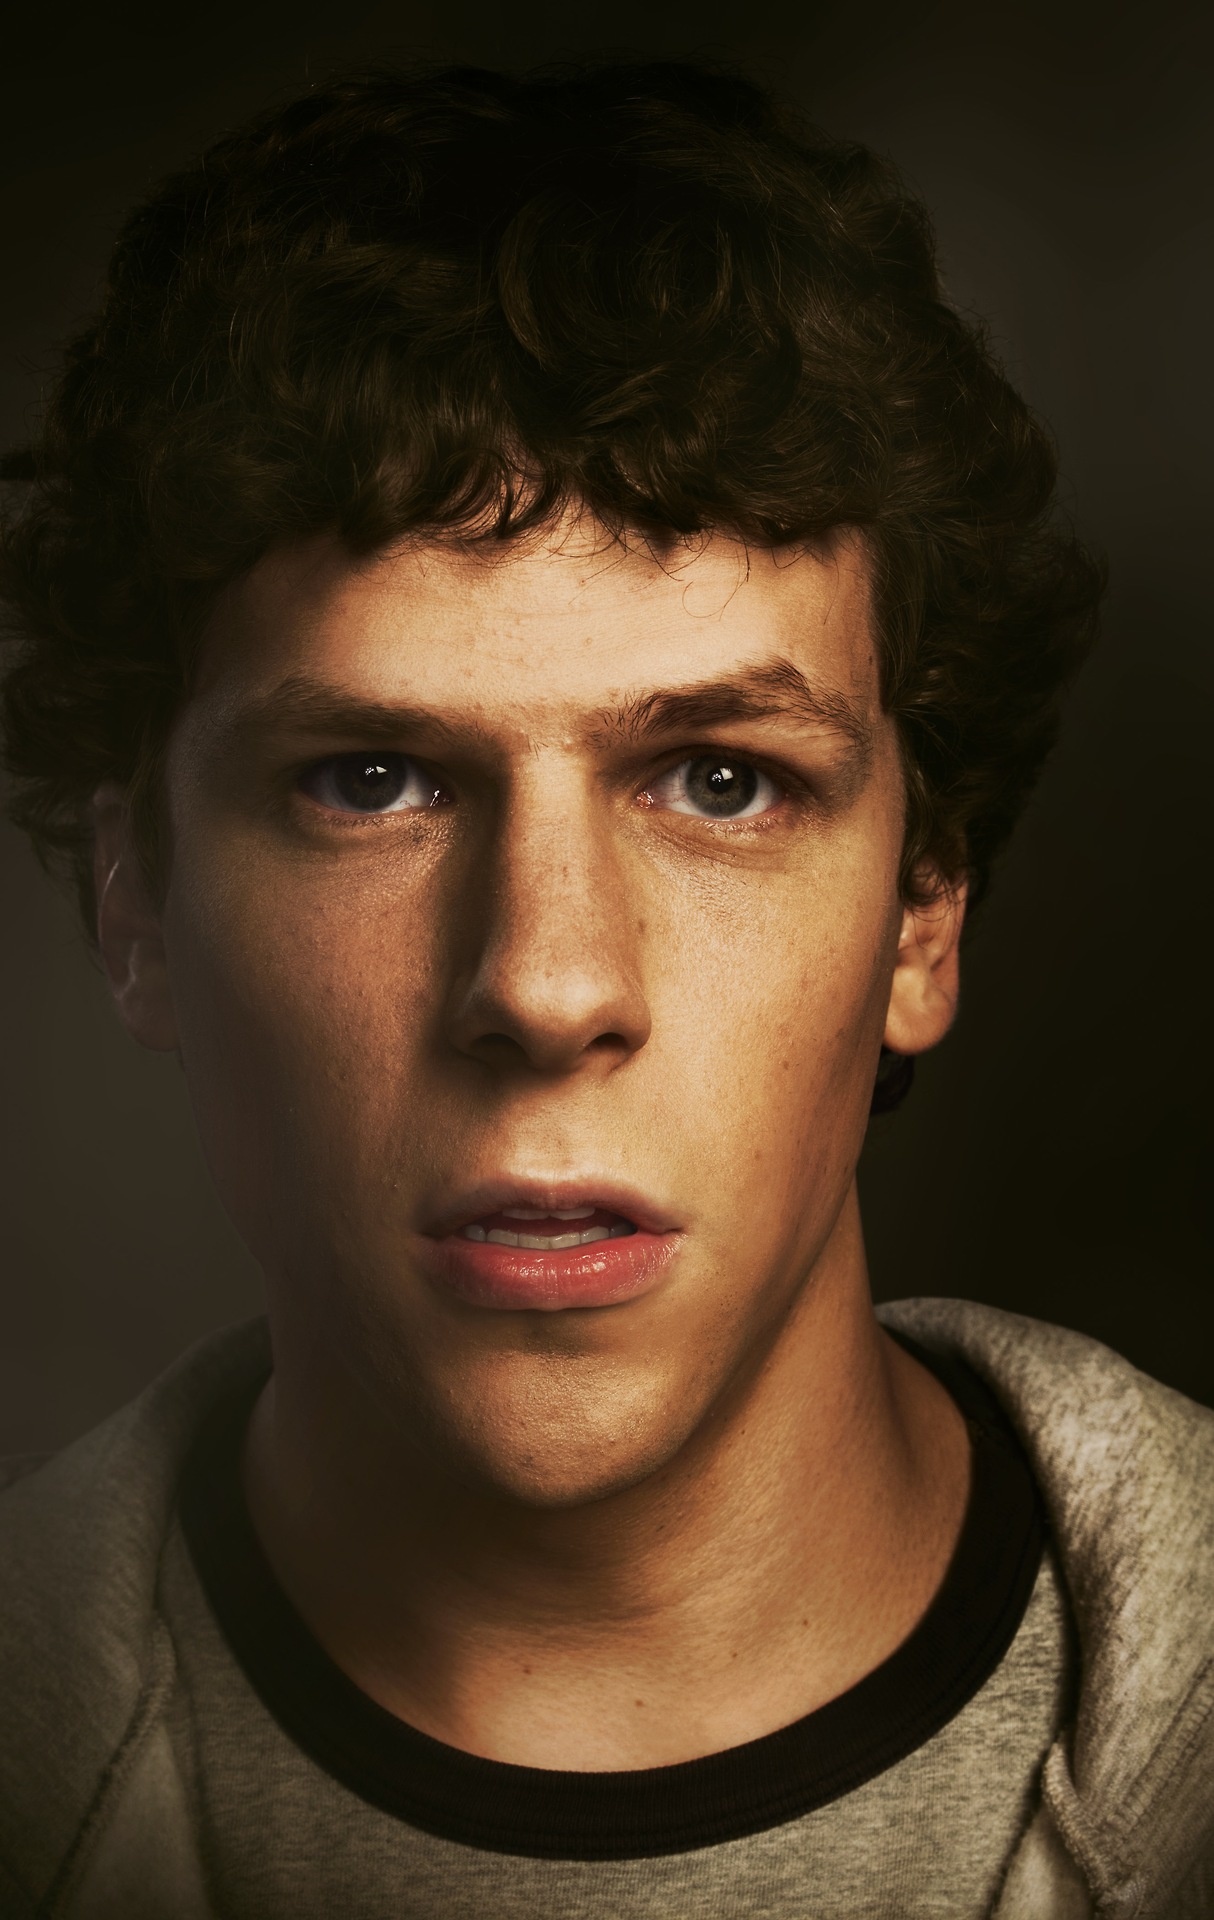 Jesse Eisenberg: Starred in the Woody Allen film To Rome with Love (2012) as Jack. 1220x1920 HD Background.